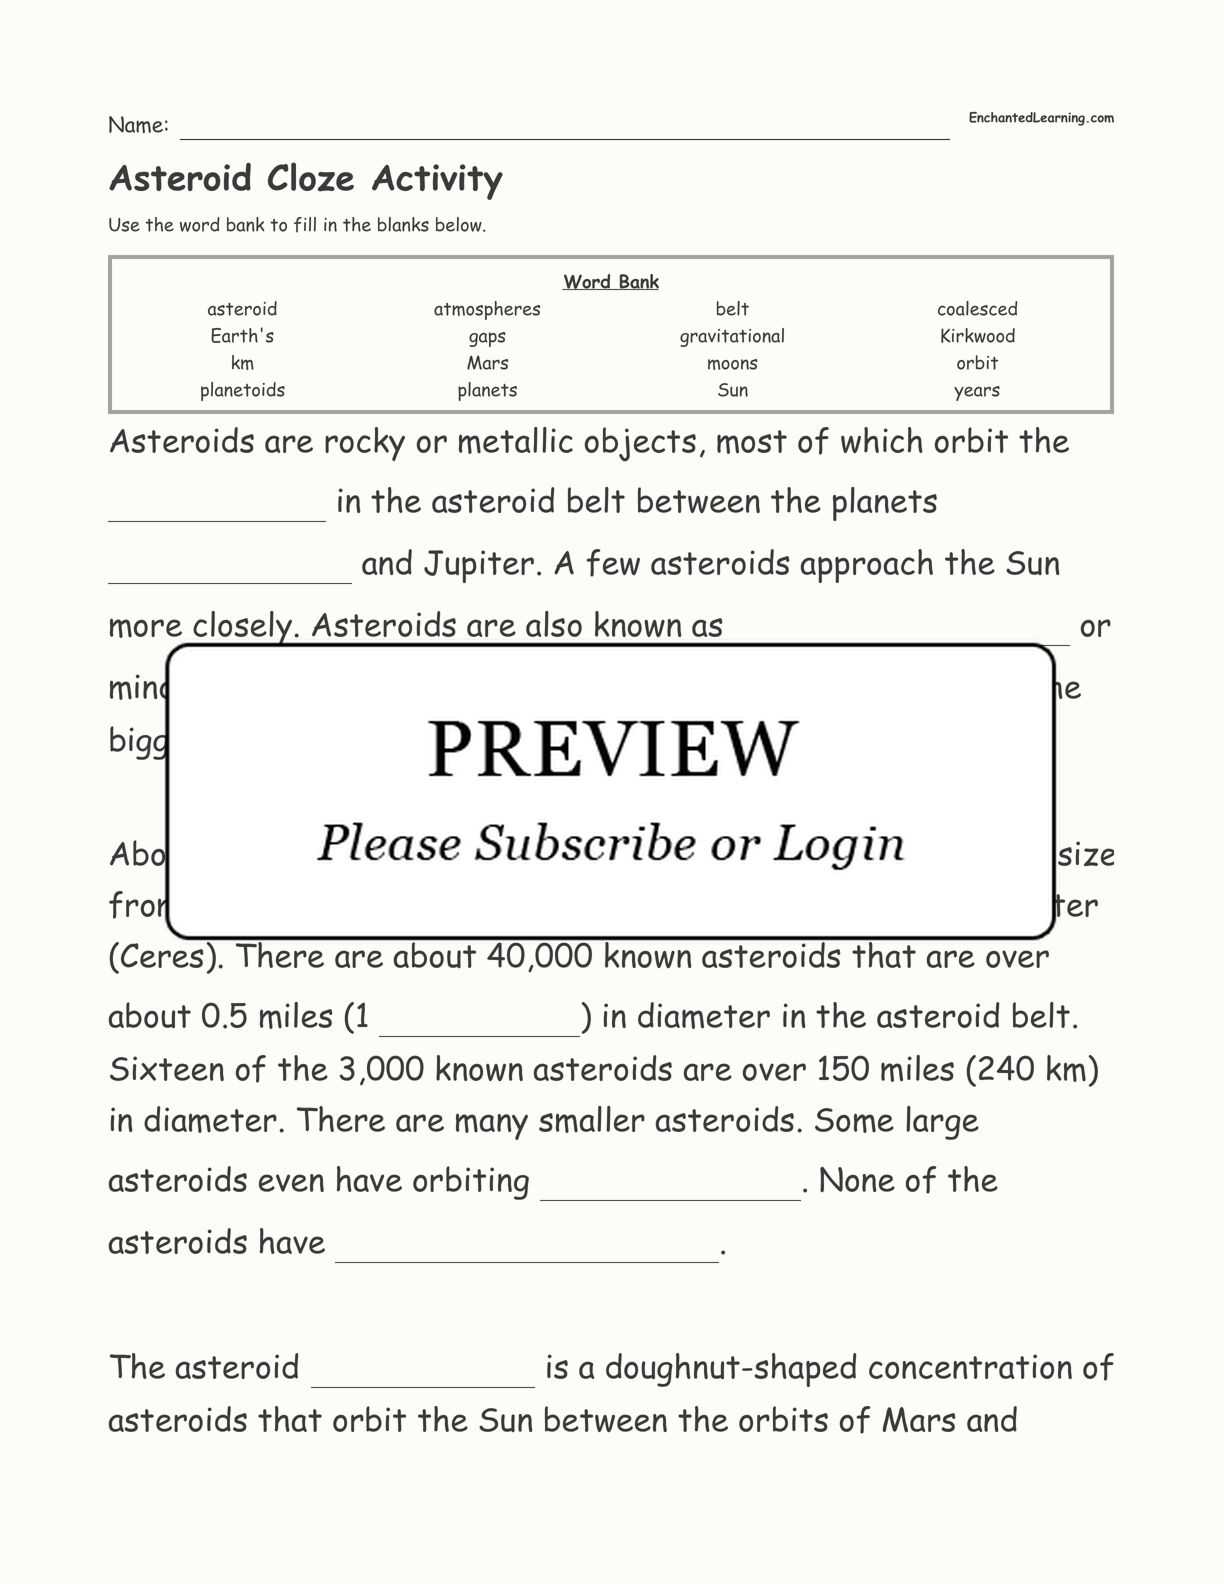 Asteroid Cloze Activity interactive worksheet page 1